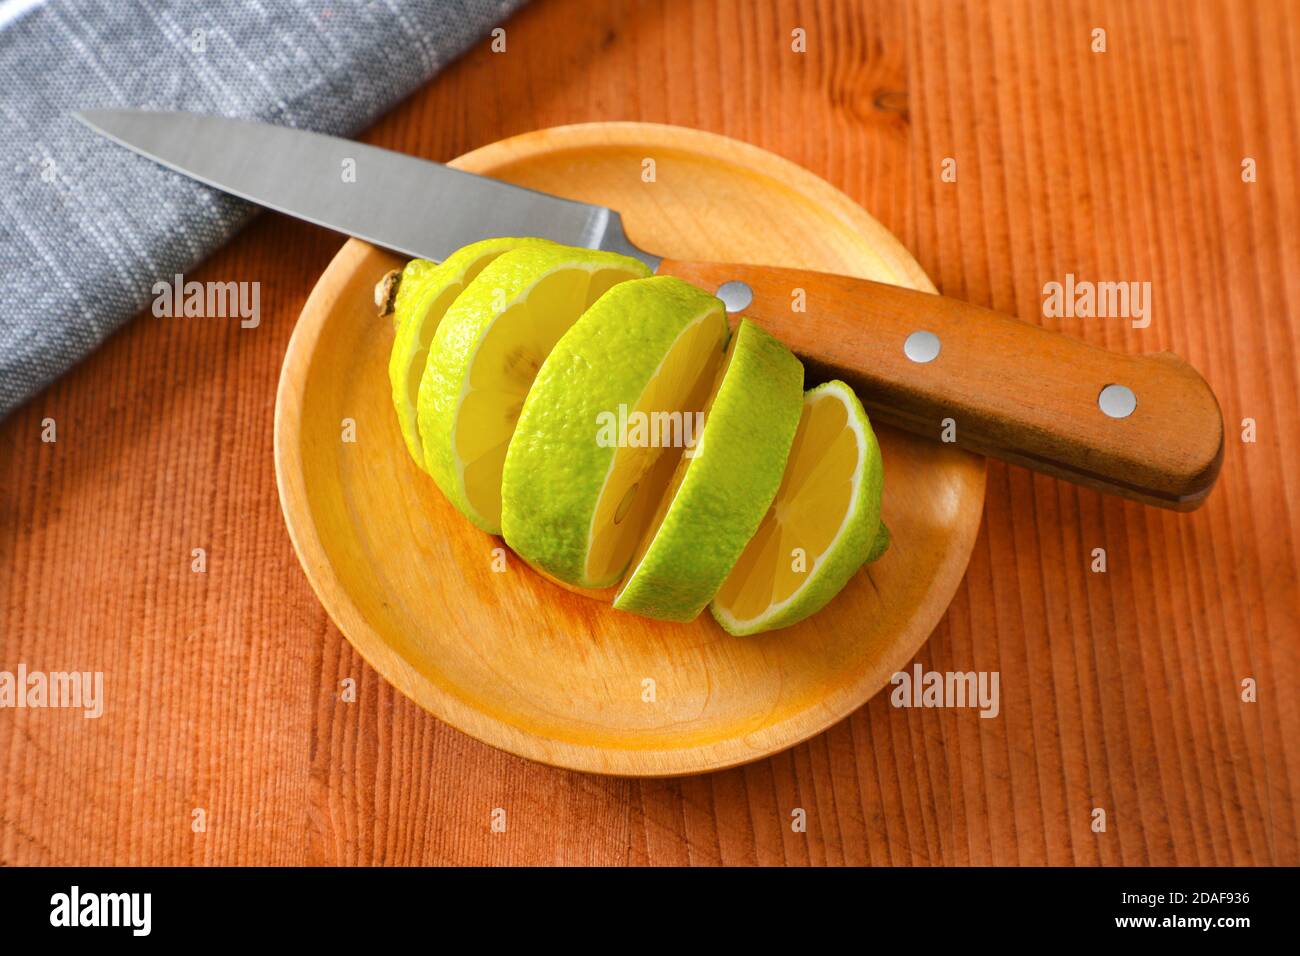 Lemon with green peel and yellow flesh, sliced on wooden plate Stock Photo